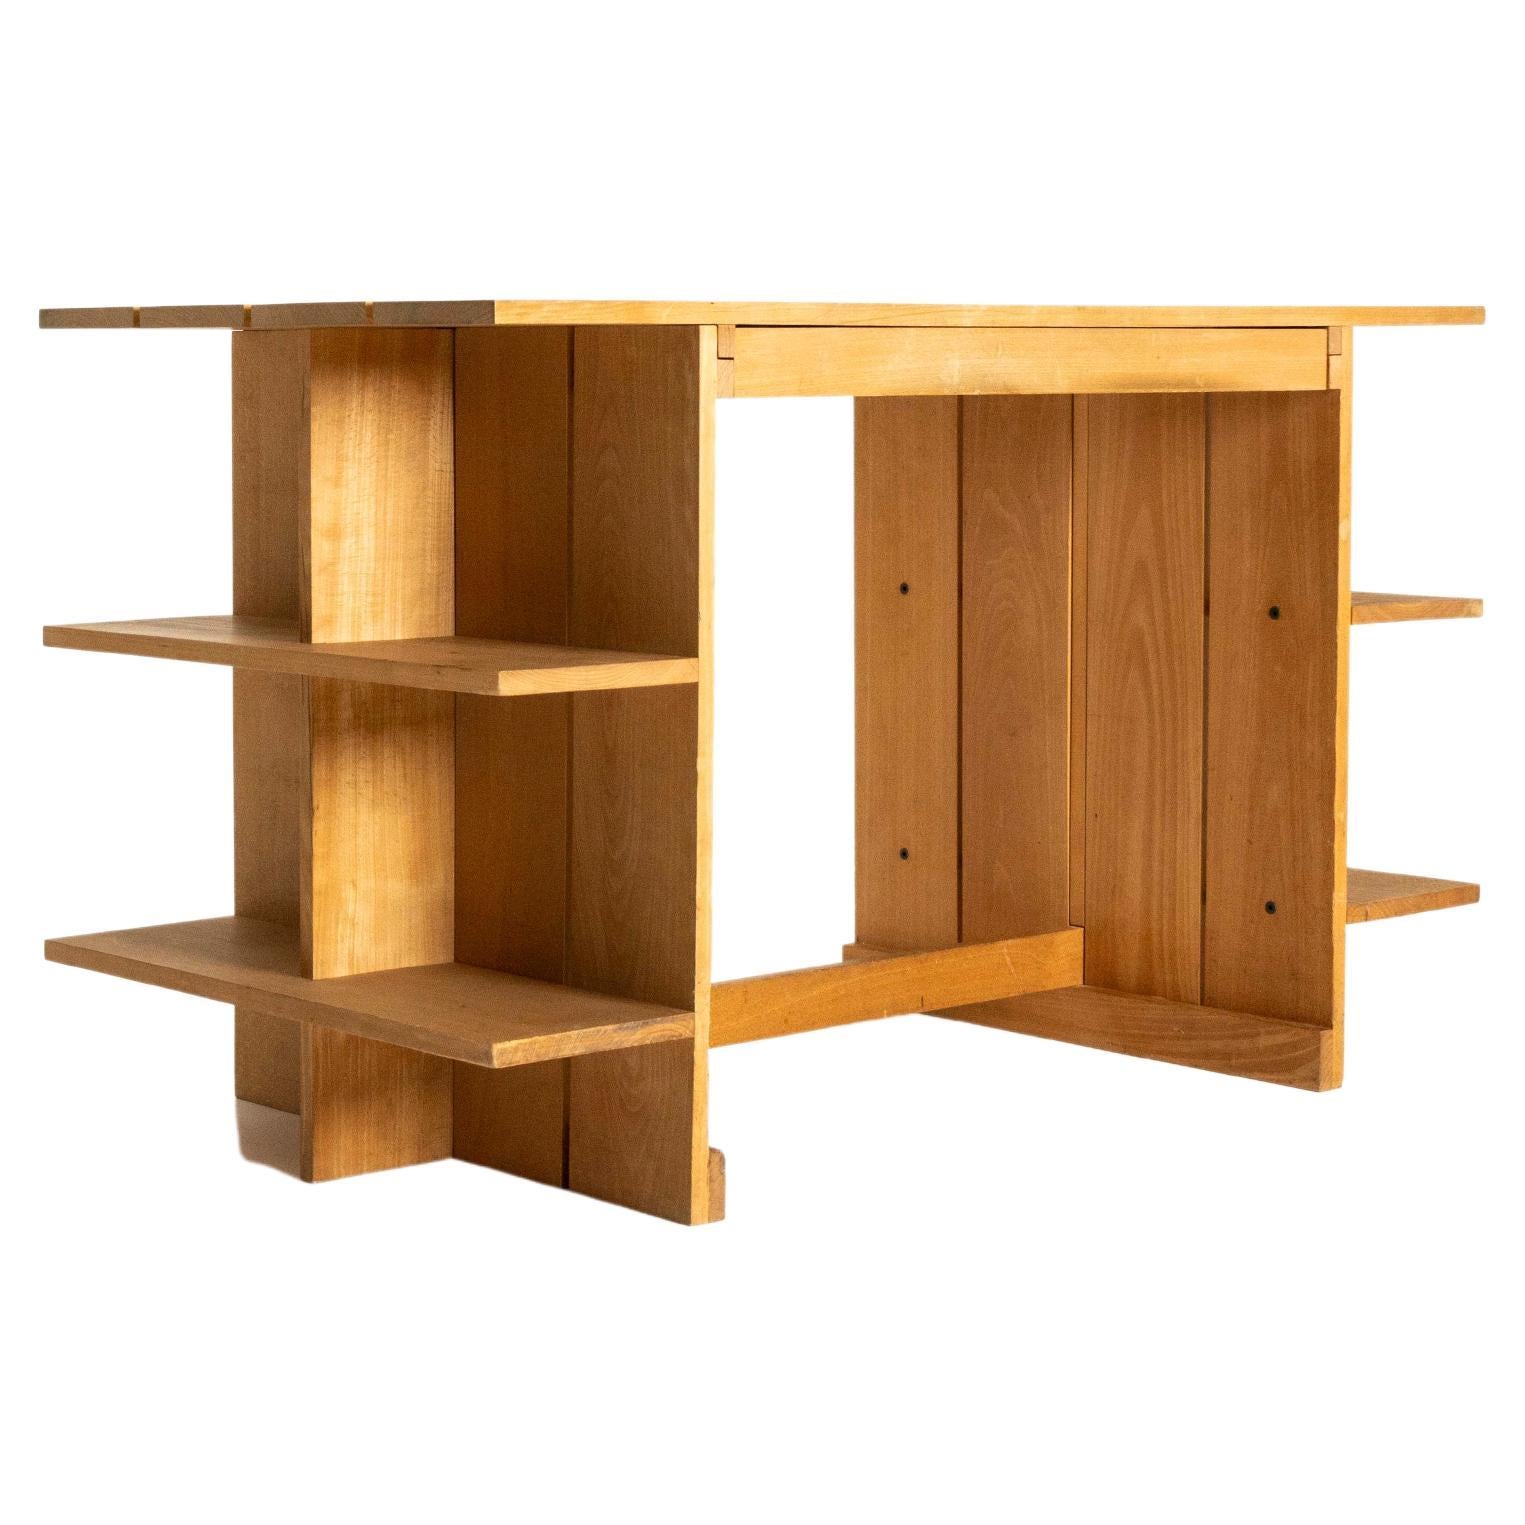 Crate Desk by Gerrit Rietveld, Designed in 1930s The Netherlands